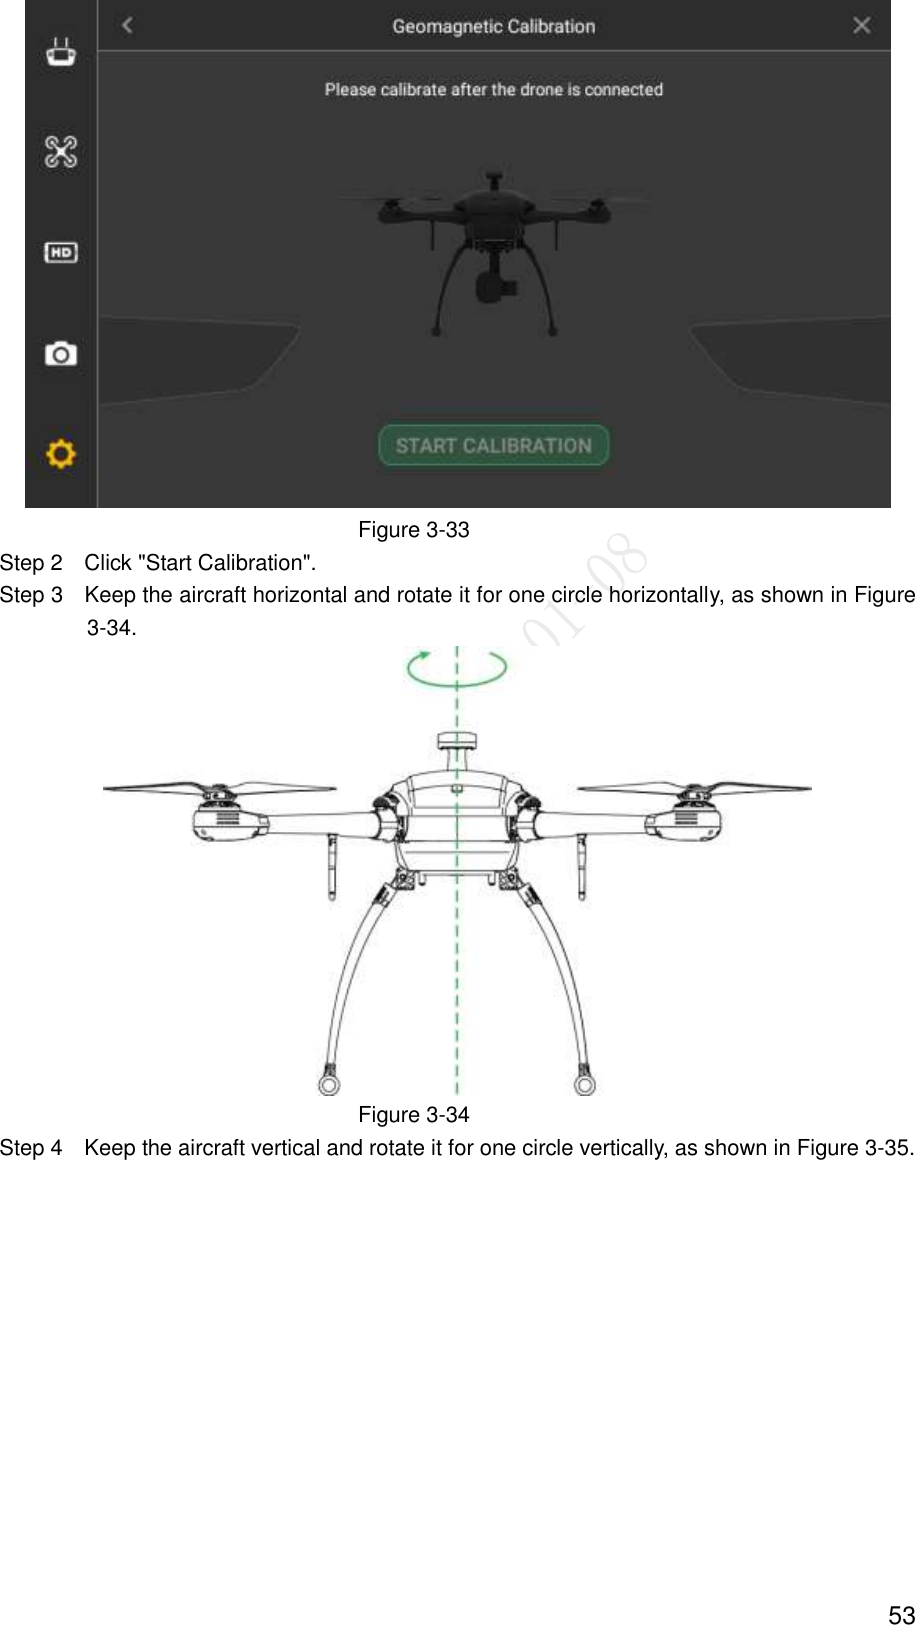  53  Figure 3-33                 Step 2    Click &quot;Start Calibration&quot;.                 Step 3    Keep the aircraft horizontal and rotate it for one circle horizontally, as shown in Figure 3-34.  Figure 3-34                 Step 4    Keep the aircraft vertical and rotate it for one circle vertically, as shown in Figure 3-35. 